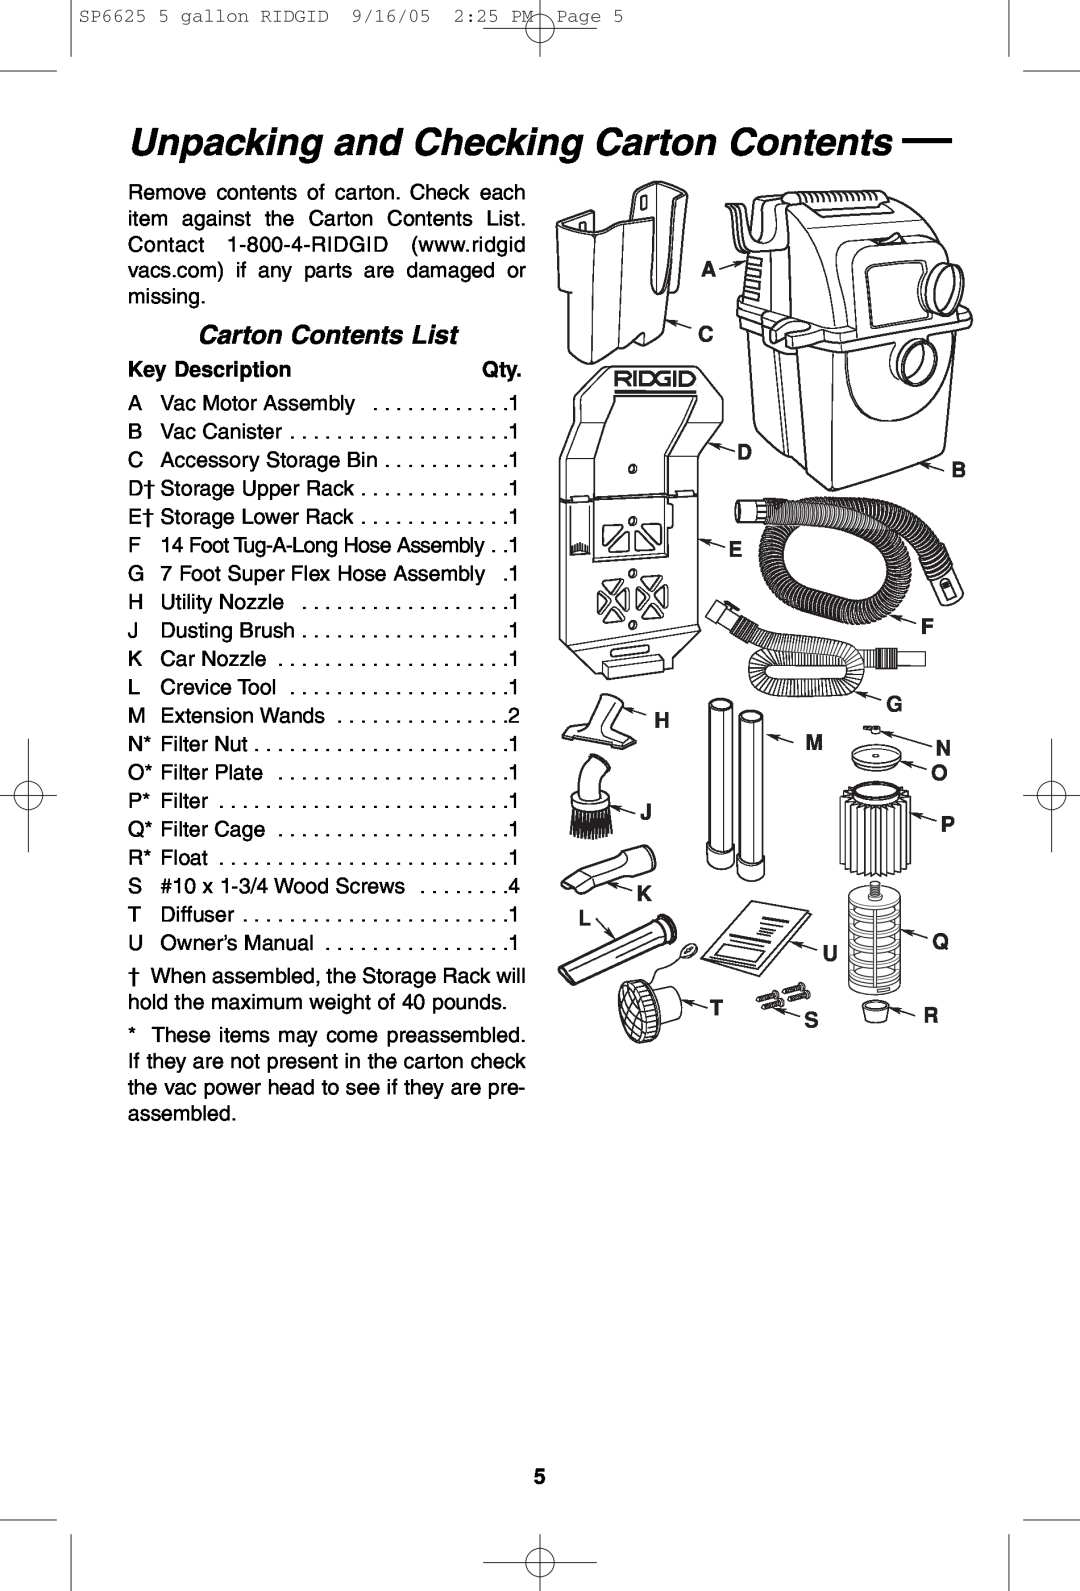 RIDGID WD55000 owner manual Unpacking and Checking Carton Contents, Carton Contents List 